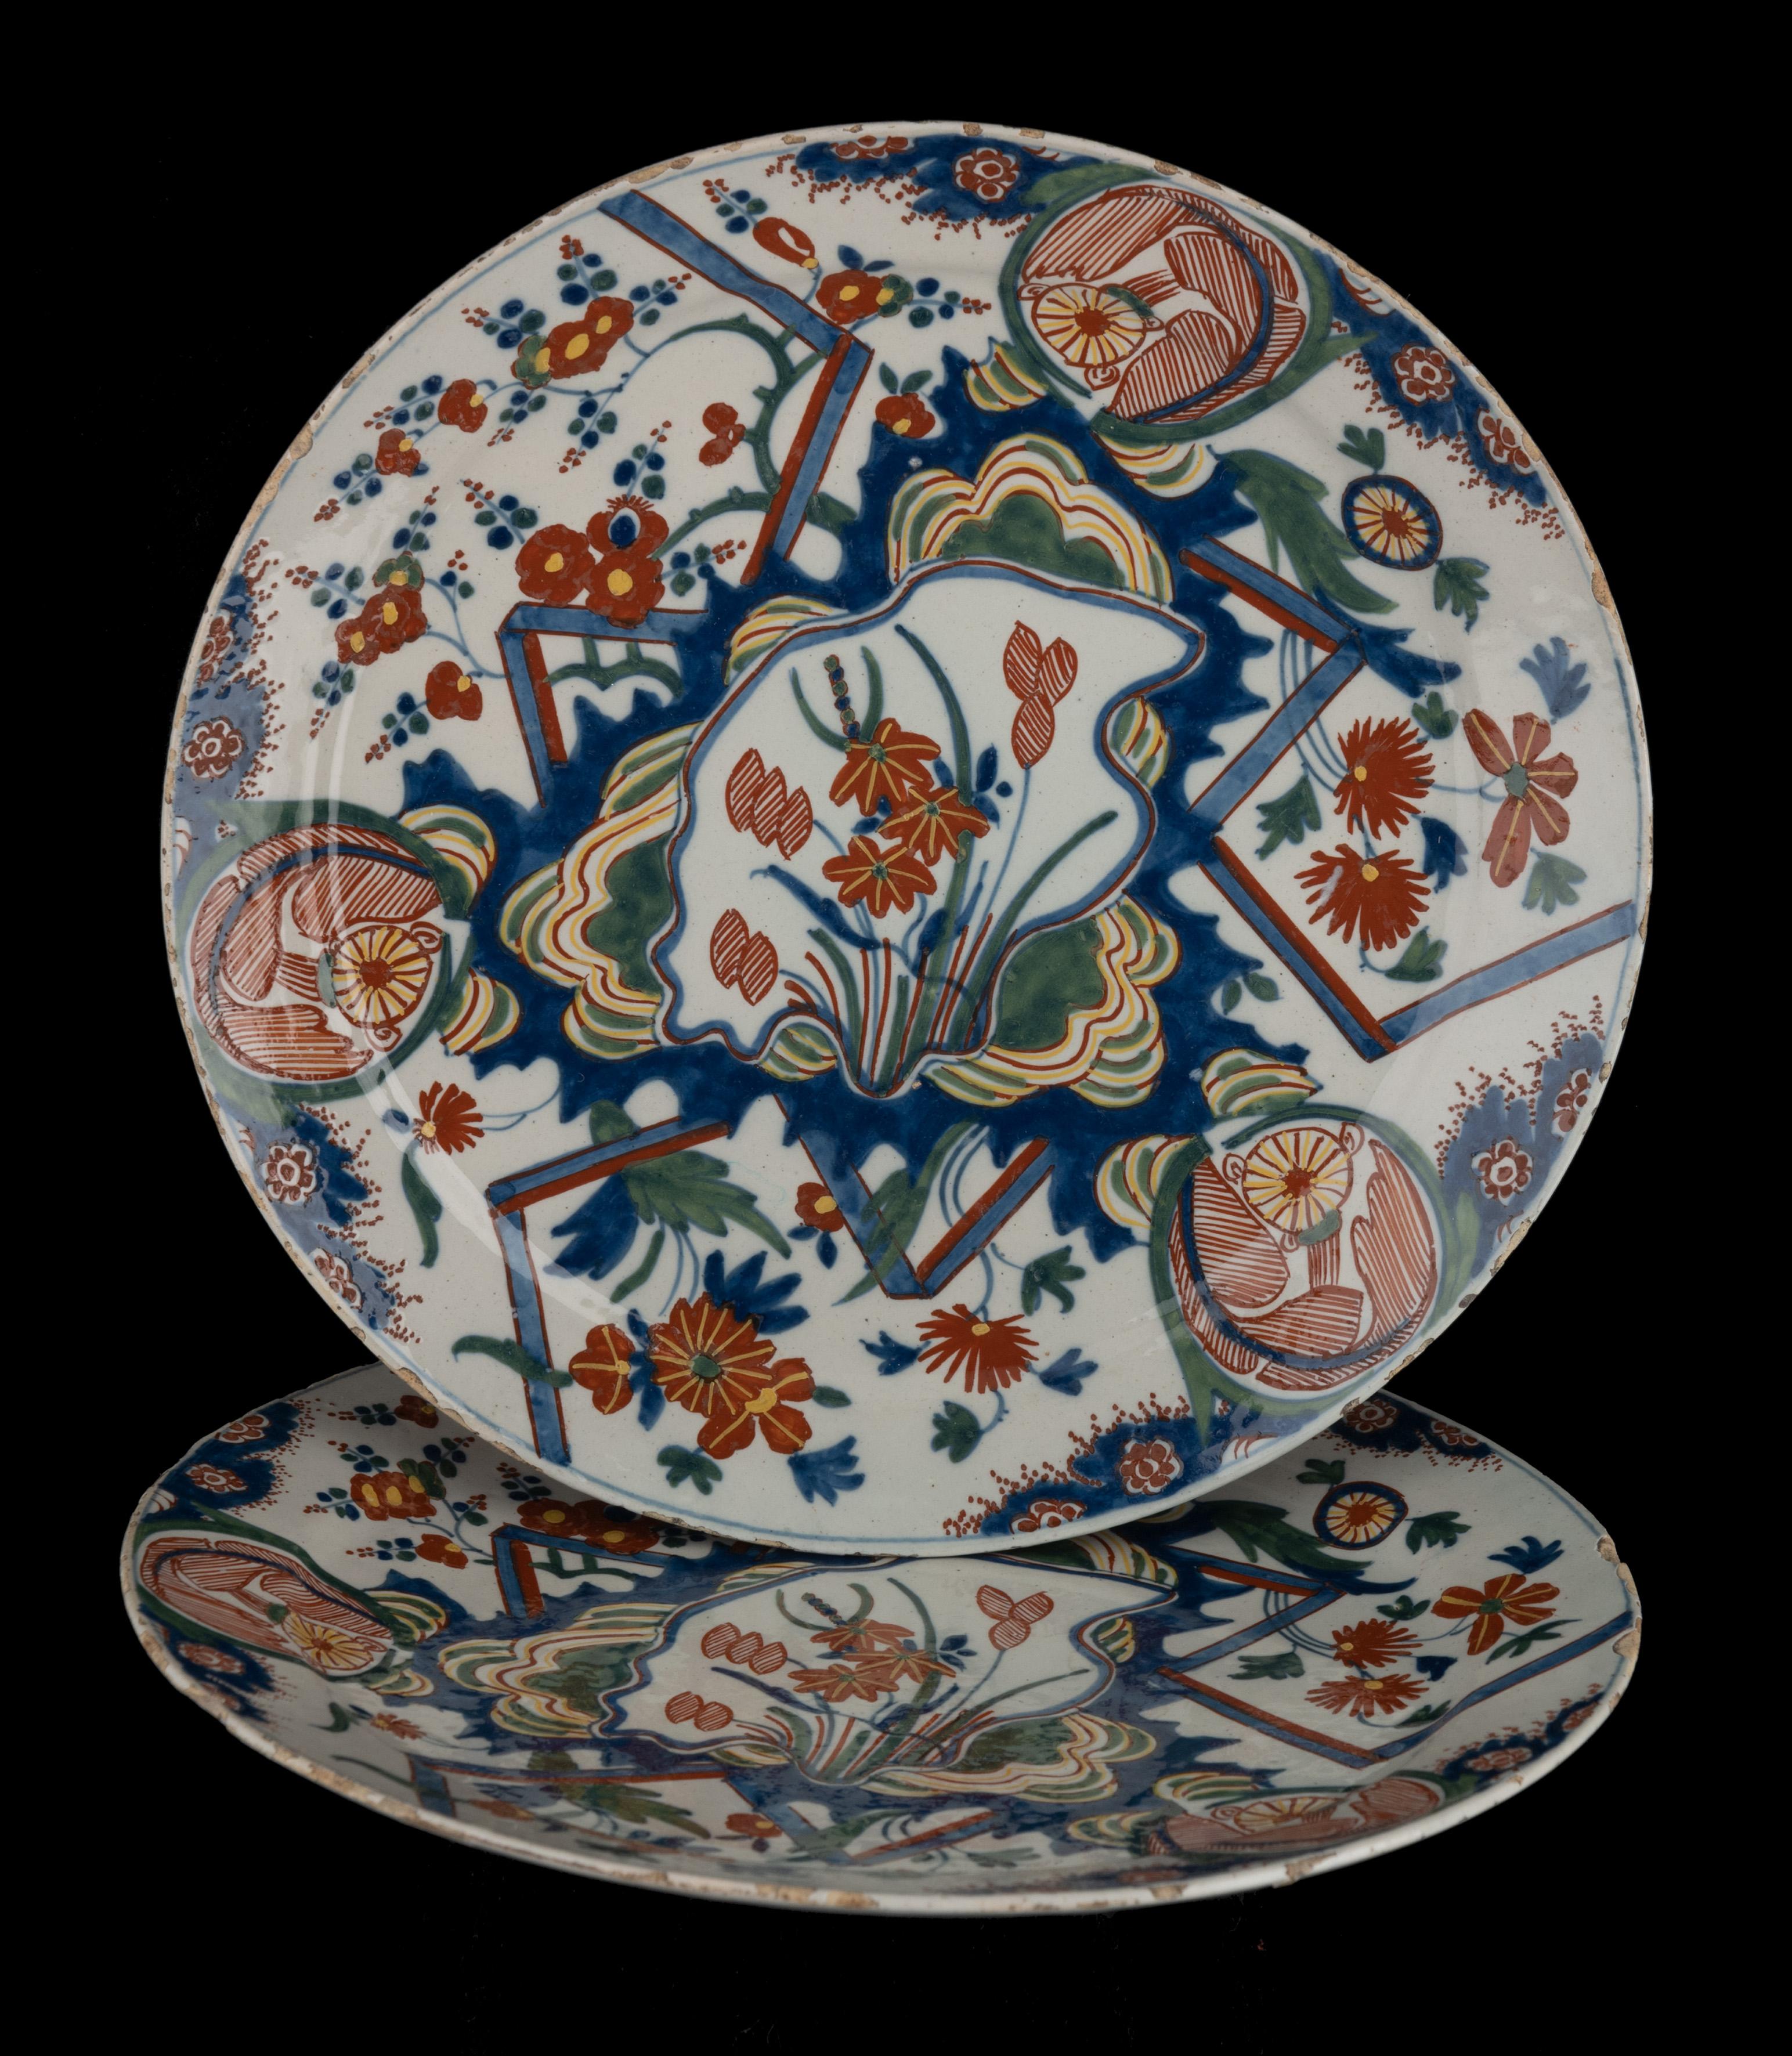 Two polychrome lightning plates Delft, 1700-1730
The Peacock pottery
Mark: D(P)AW 9 

The dish has a small flange and is painted in polychrome with the so-called lightning decor. The center is decorated with an irregular shaped cartouche, filled